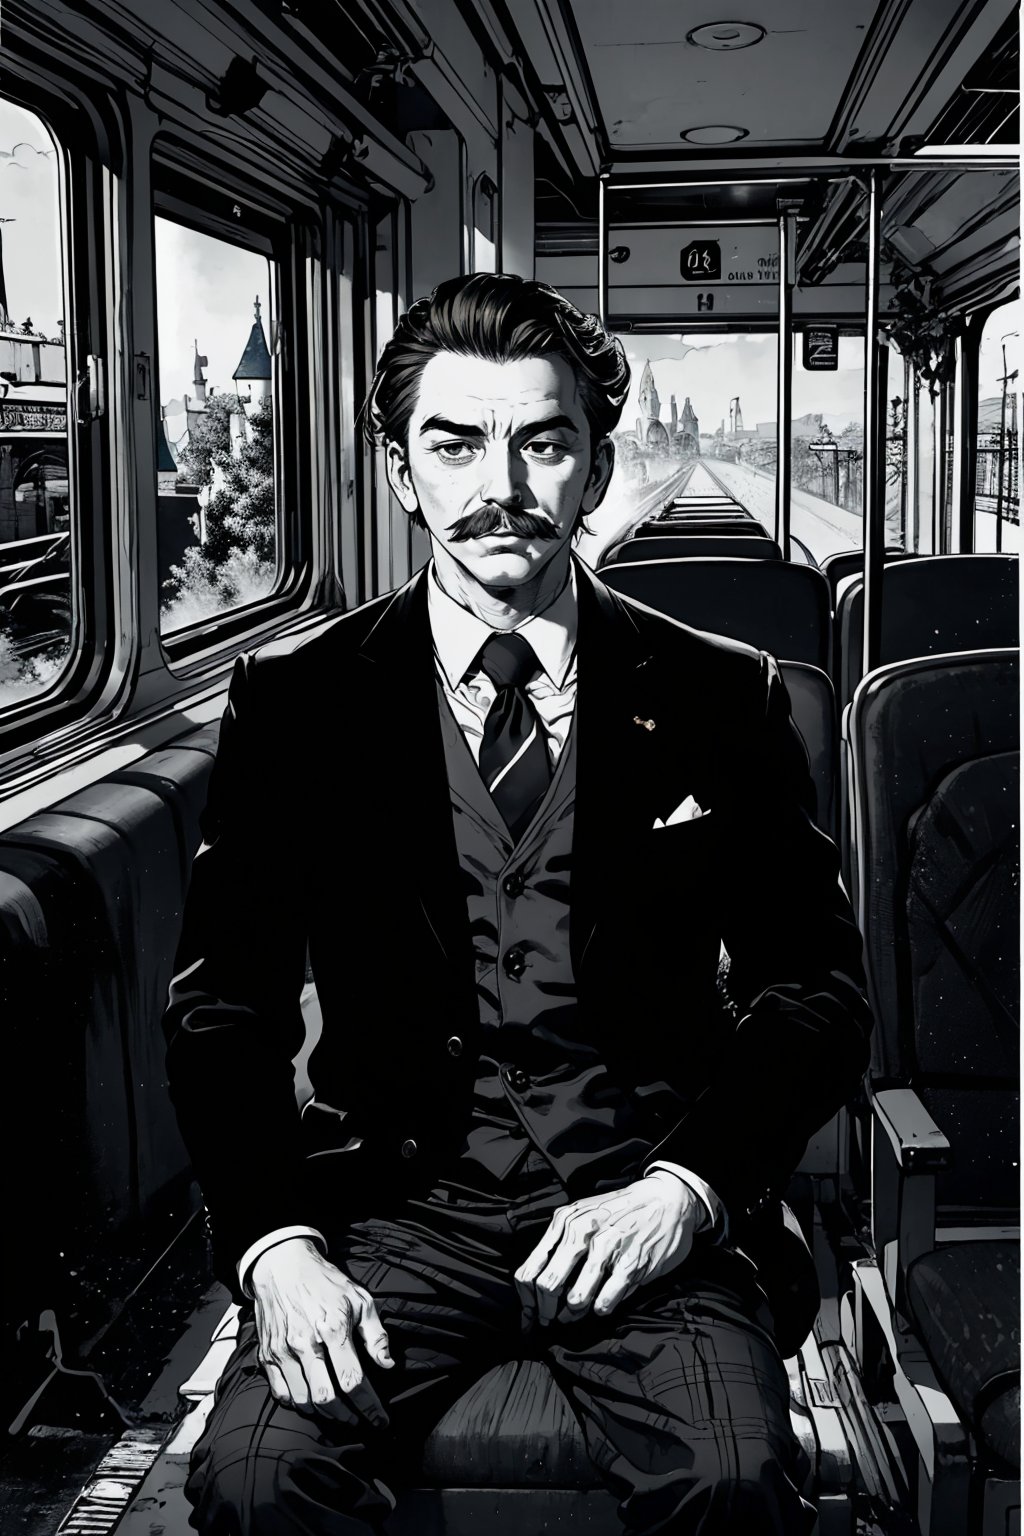 Boichi manga style, monochrome, greyscale, solo, a young man, he is Walt Disney, the founder of Disneyland, slicked hairstyle, mustache, traditional plaid suit, he was sitting in the train compartment, looking at the scenery outside the window, a young  lady, blonde hair, sit opposite him, ((masterpiece))